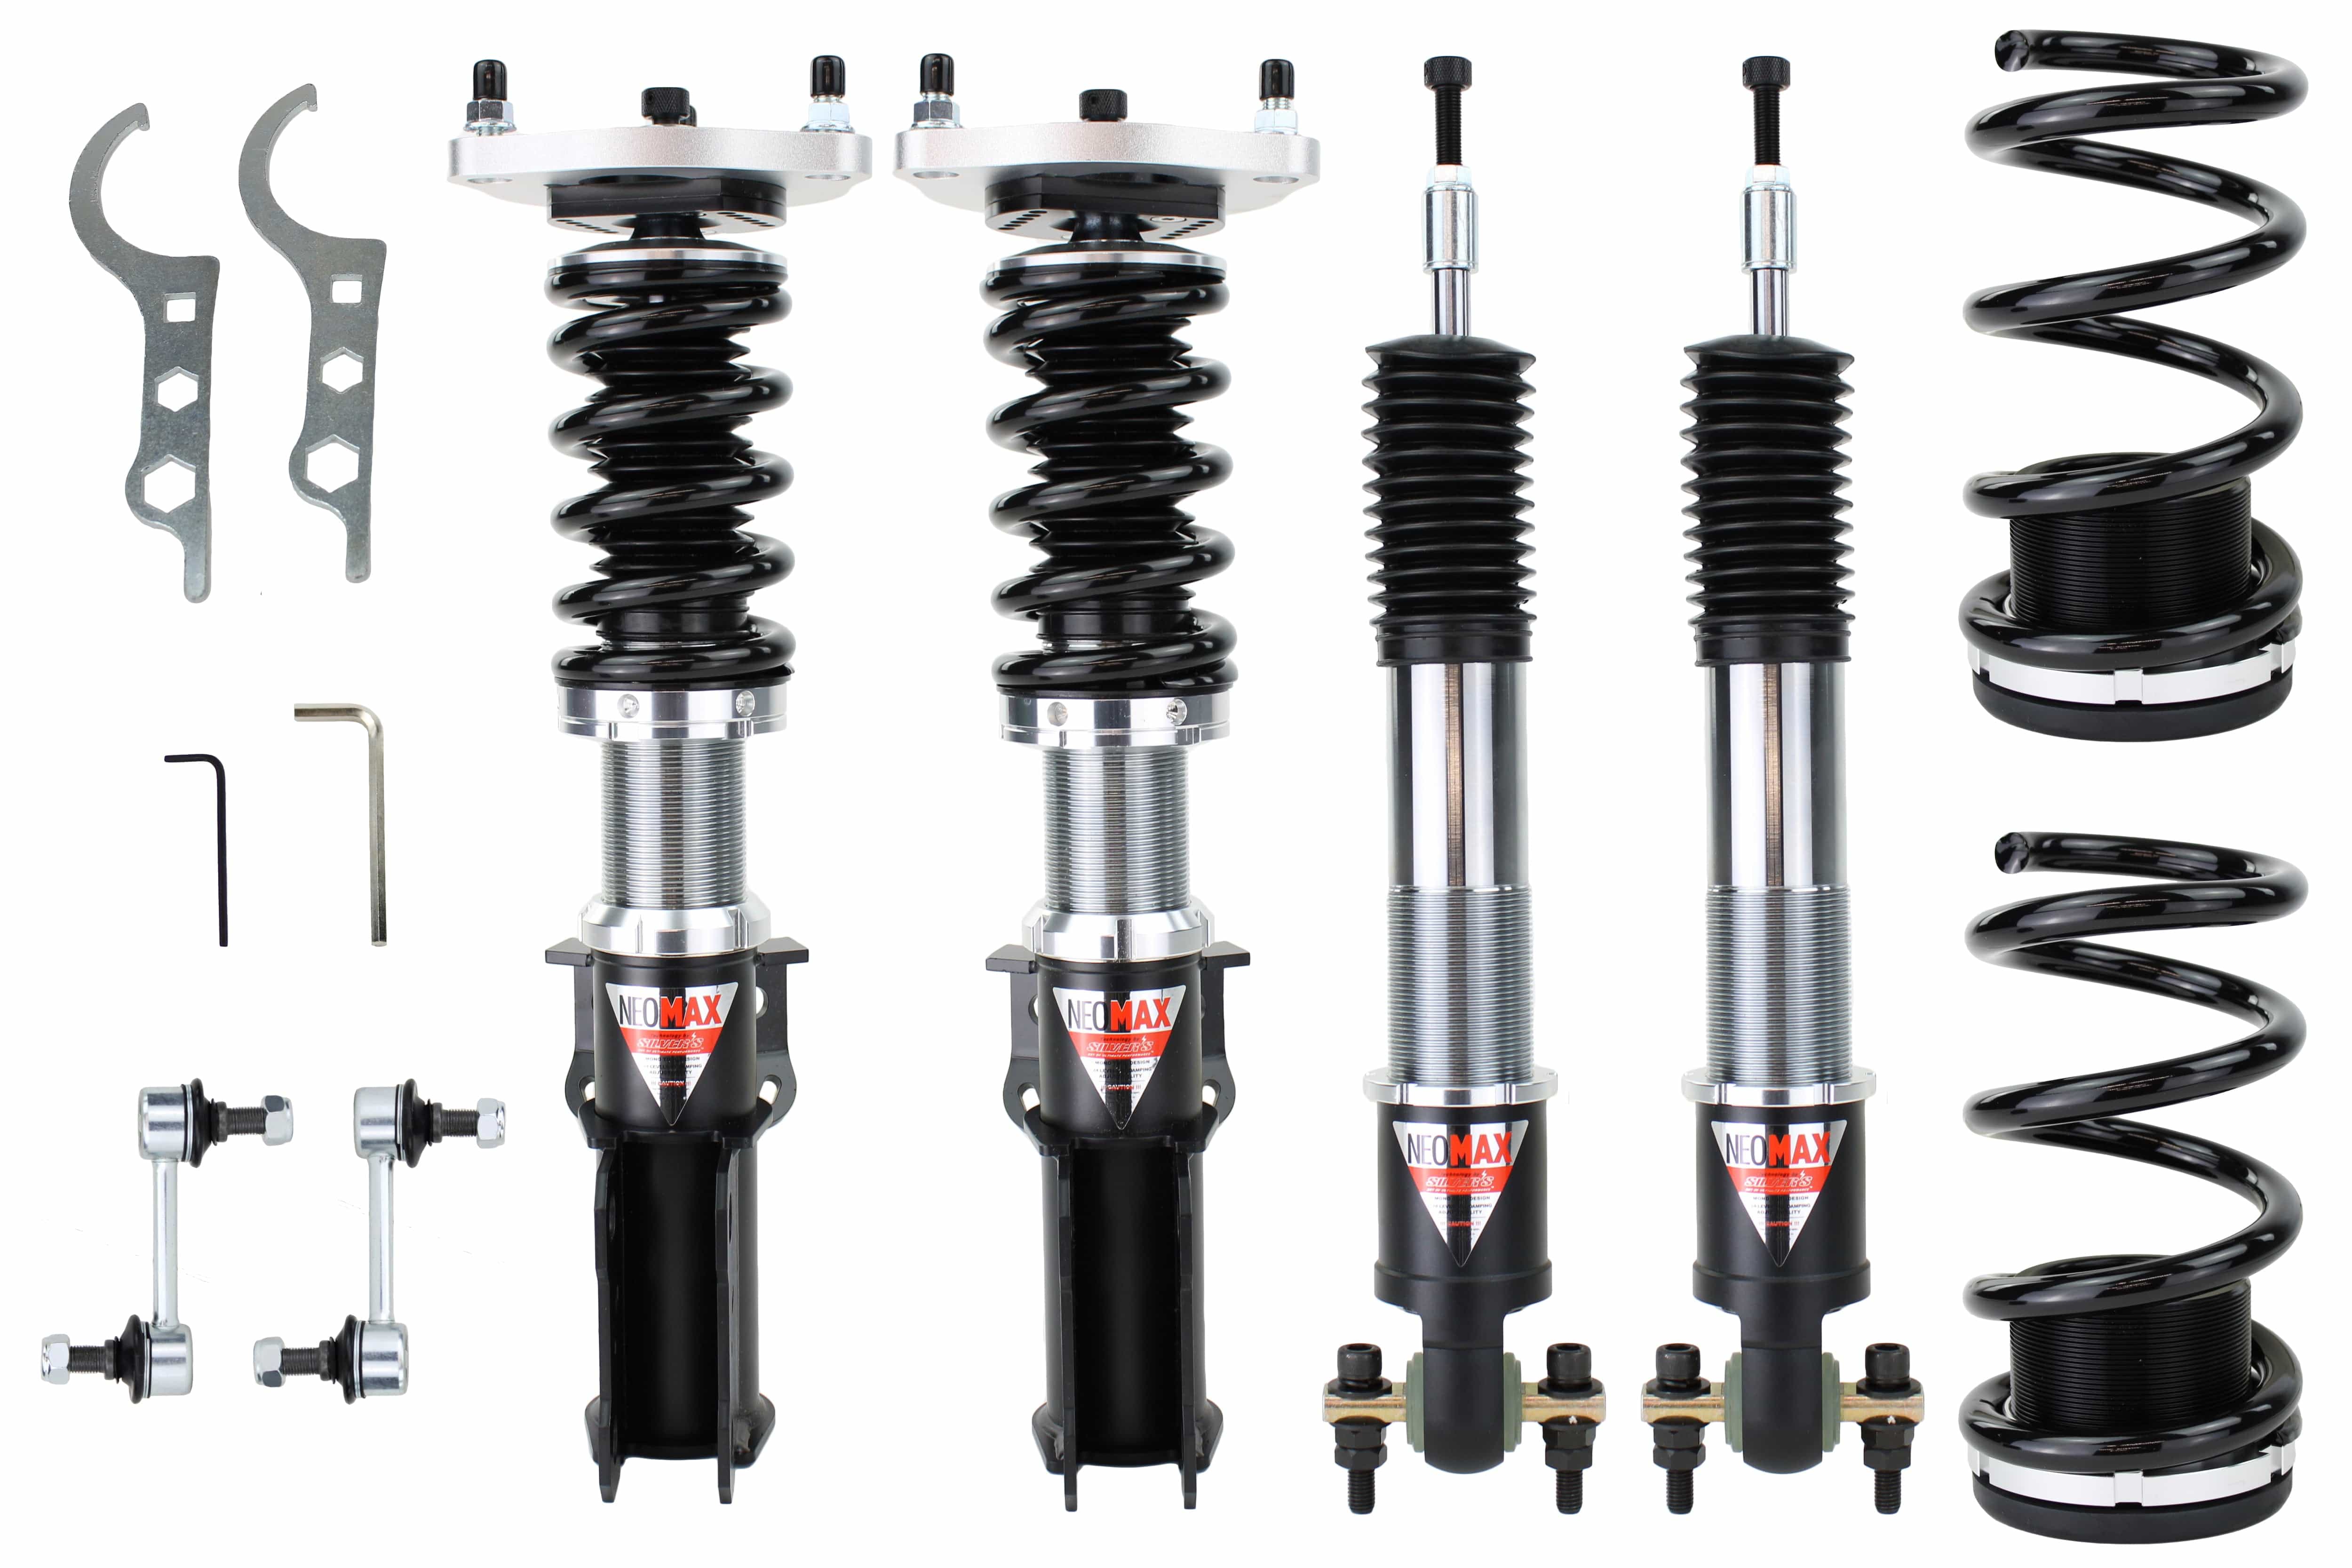 Silvers NEOMAX Coilovers for 2015+ Ford Mustang S550